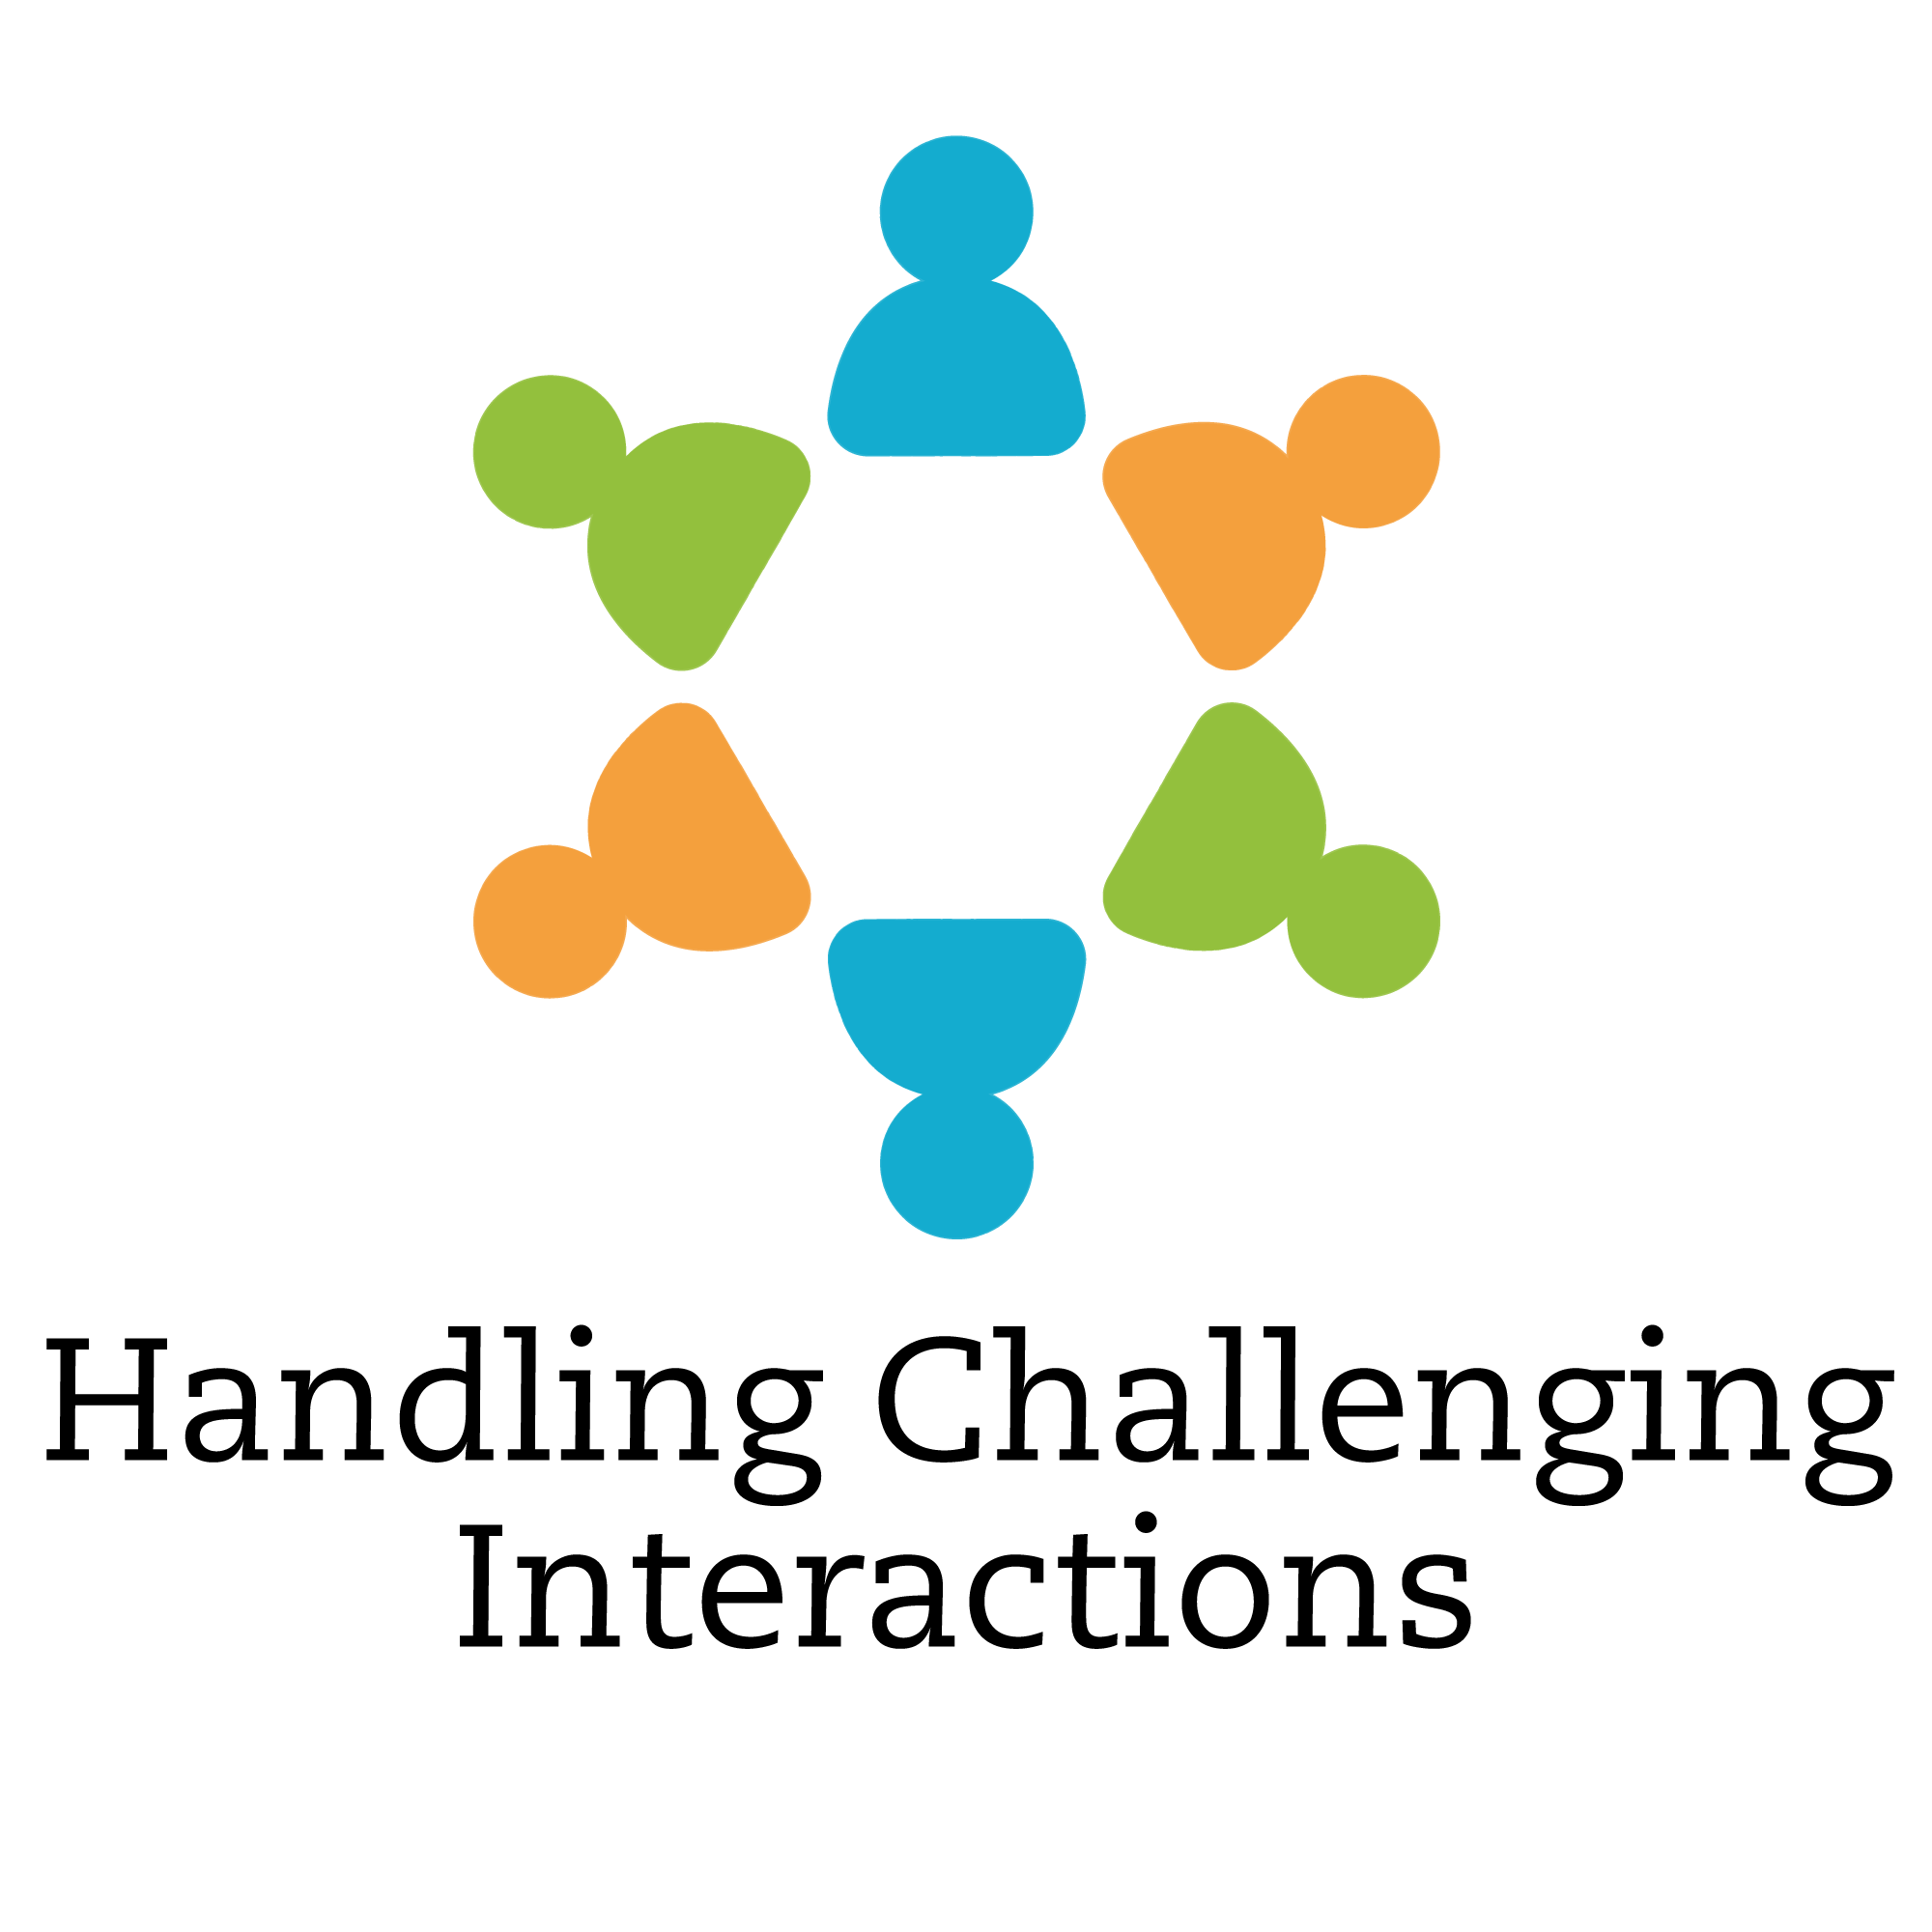 Handling challenging interactions with confidence (5 Feb)